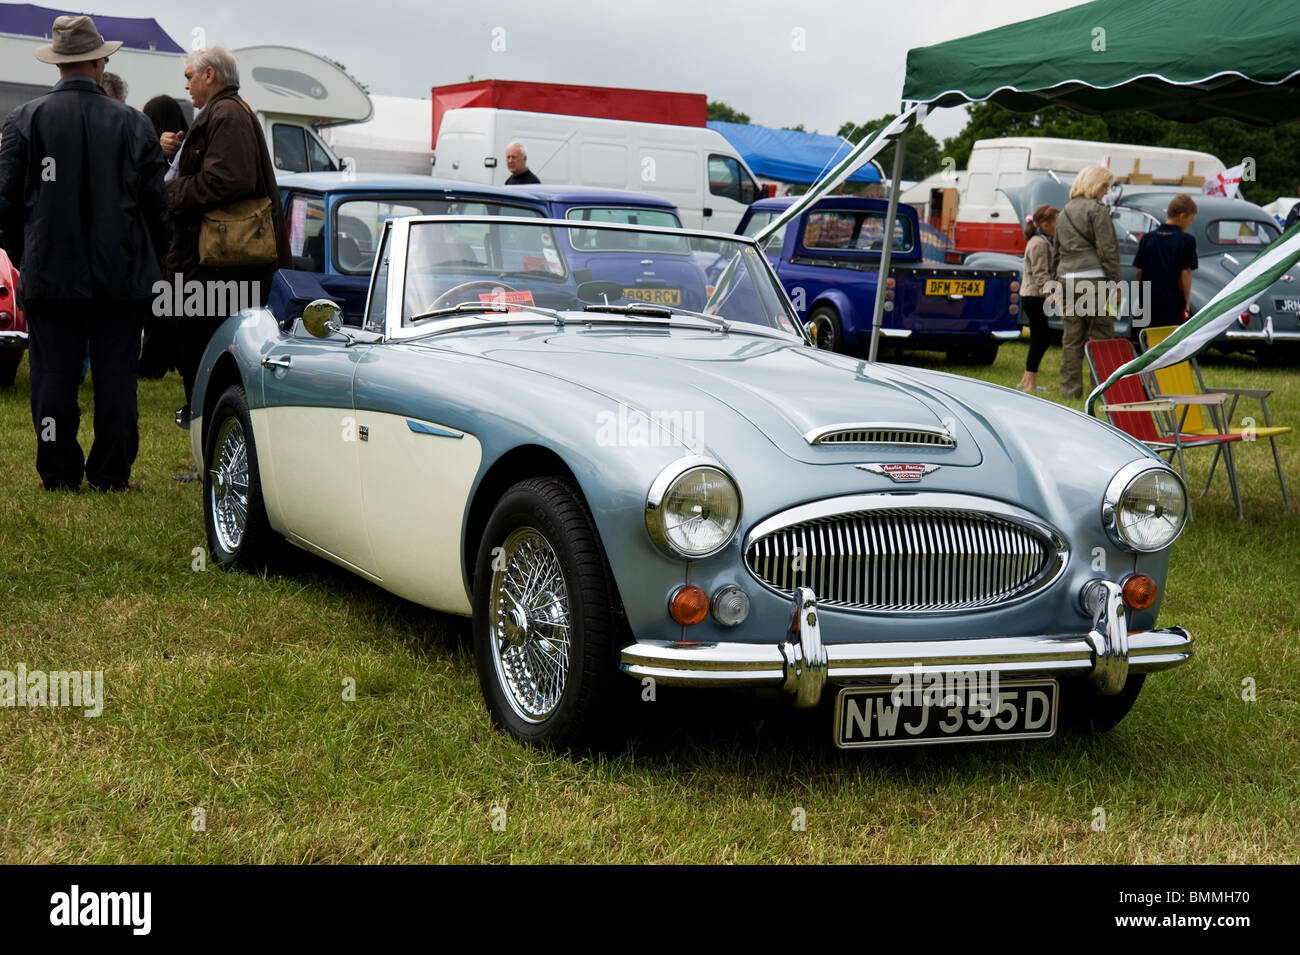 Austin Healey 3000 Mk3 on display at Heskin Hall traction engine and vintage vehicle rally Stock Photo